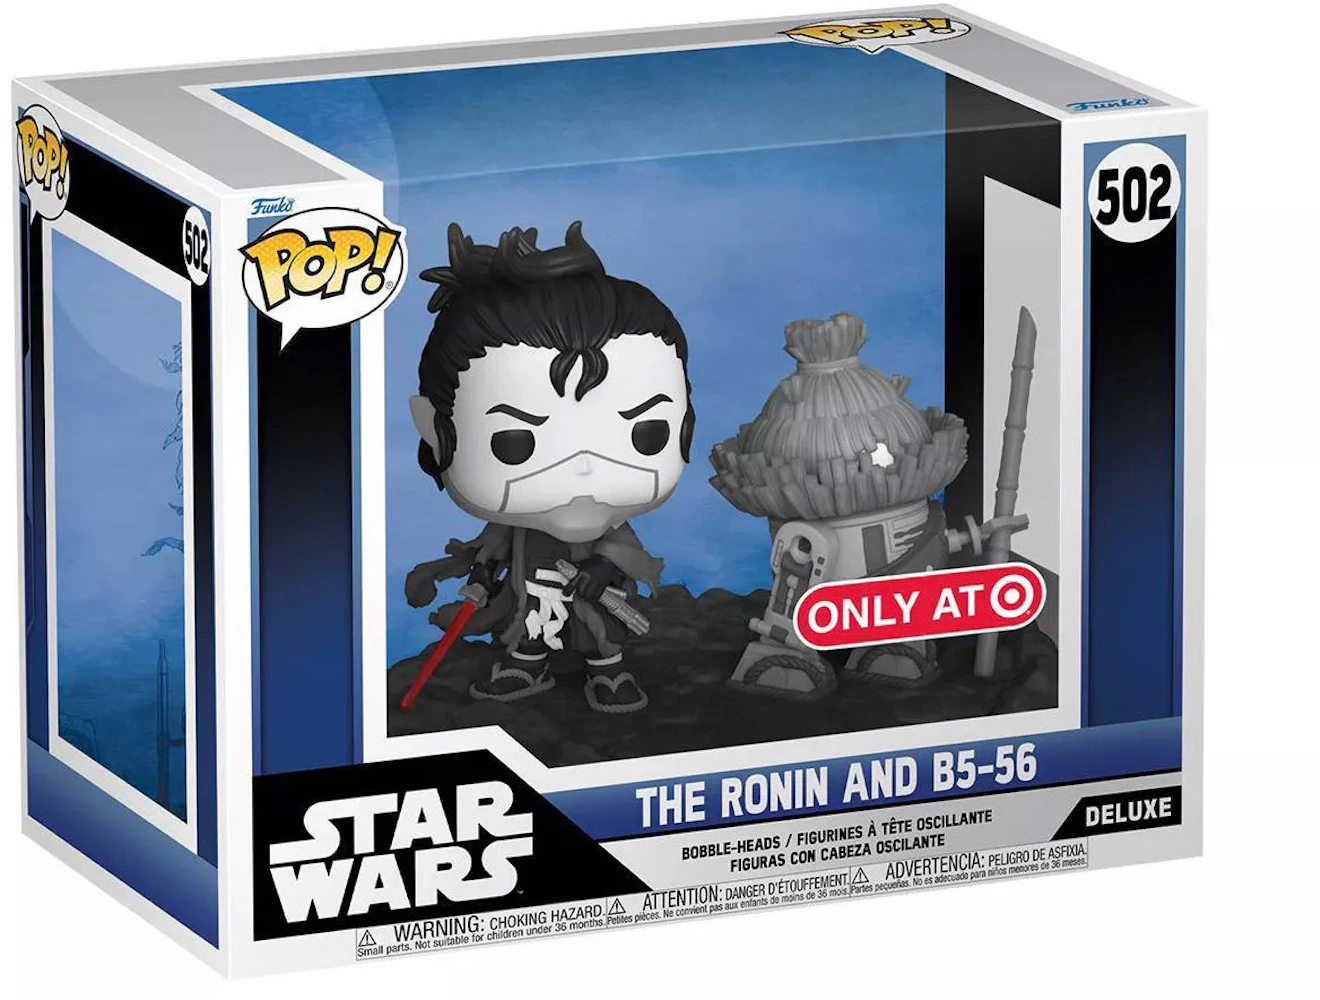 https://images.stockx.com/images/Funko-Pop-Deluxe-Star-Wars-Visions-The-Ronin-And-B5-56-Target-Exclusive-Figure-502.jpg?fit=fill&bg=FFFFFF&w=700&h=500&fm=webp&auto=compress&q=90&dpr=2&trim=color&updated_at=1639115694